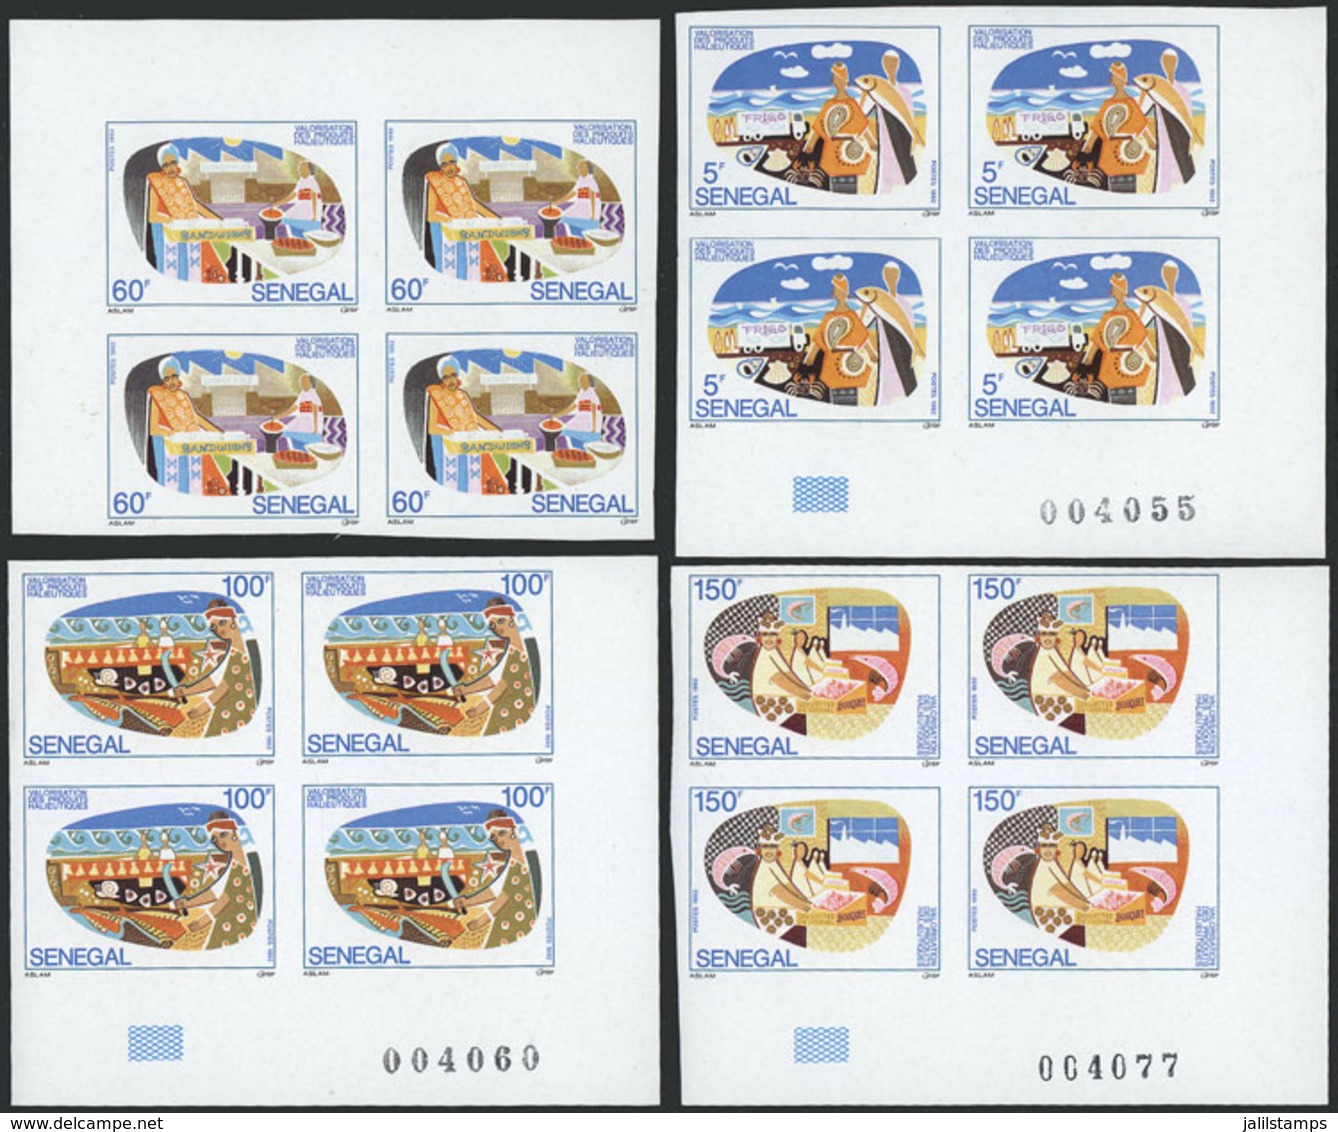 SENEGAL: Yvert 968/971, 1992 Fish Industry, Complete Set Of 4 Values In IMPERFORATE BLOCKS OF 4, Excellent Quality! - Senegal (1960-...)